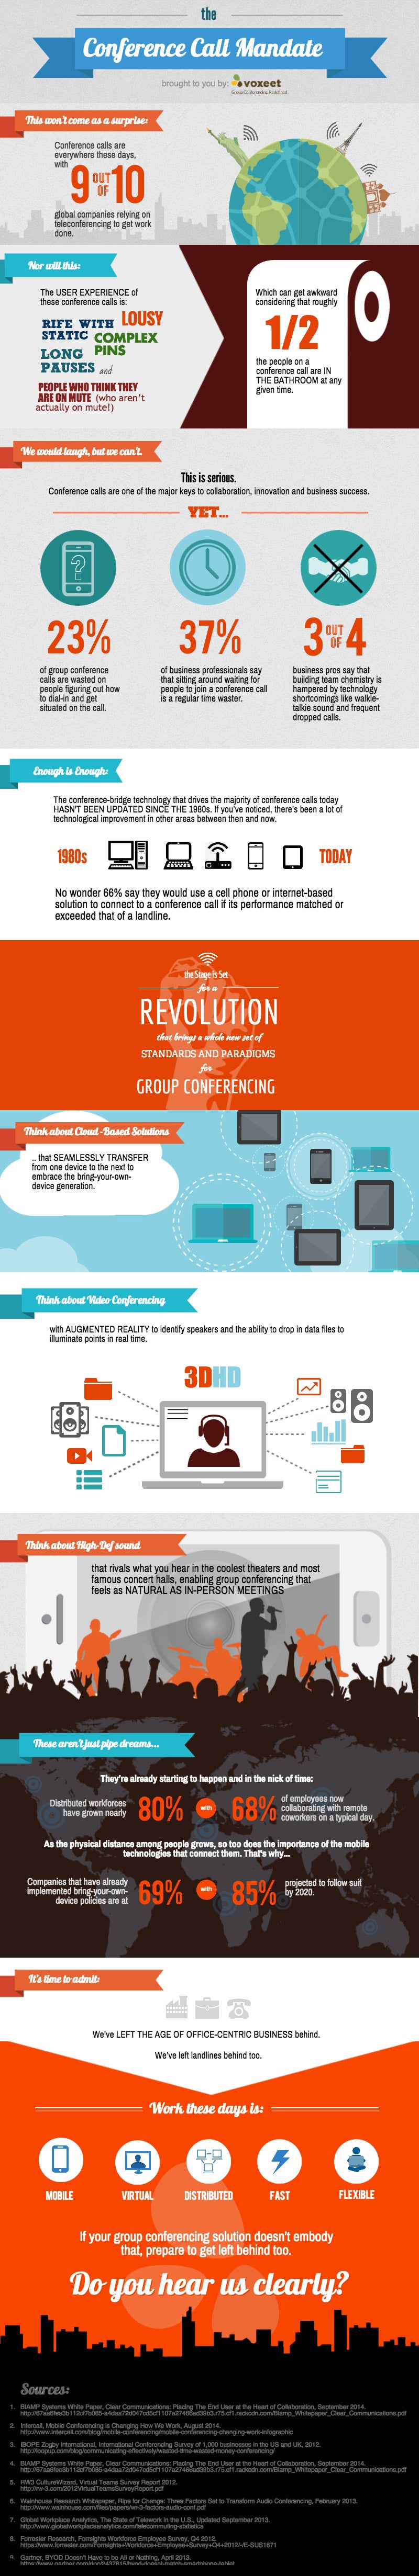 Mobile Conferencing Predictions for 2015 and Beyond: How BYOD Will Fuel Innovation (infographic)